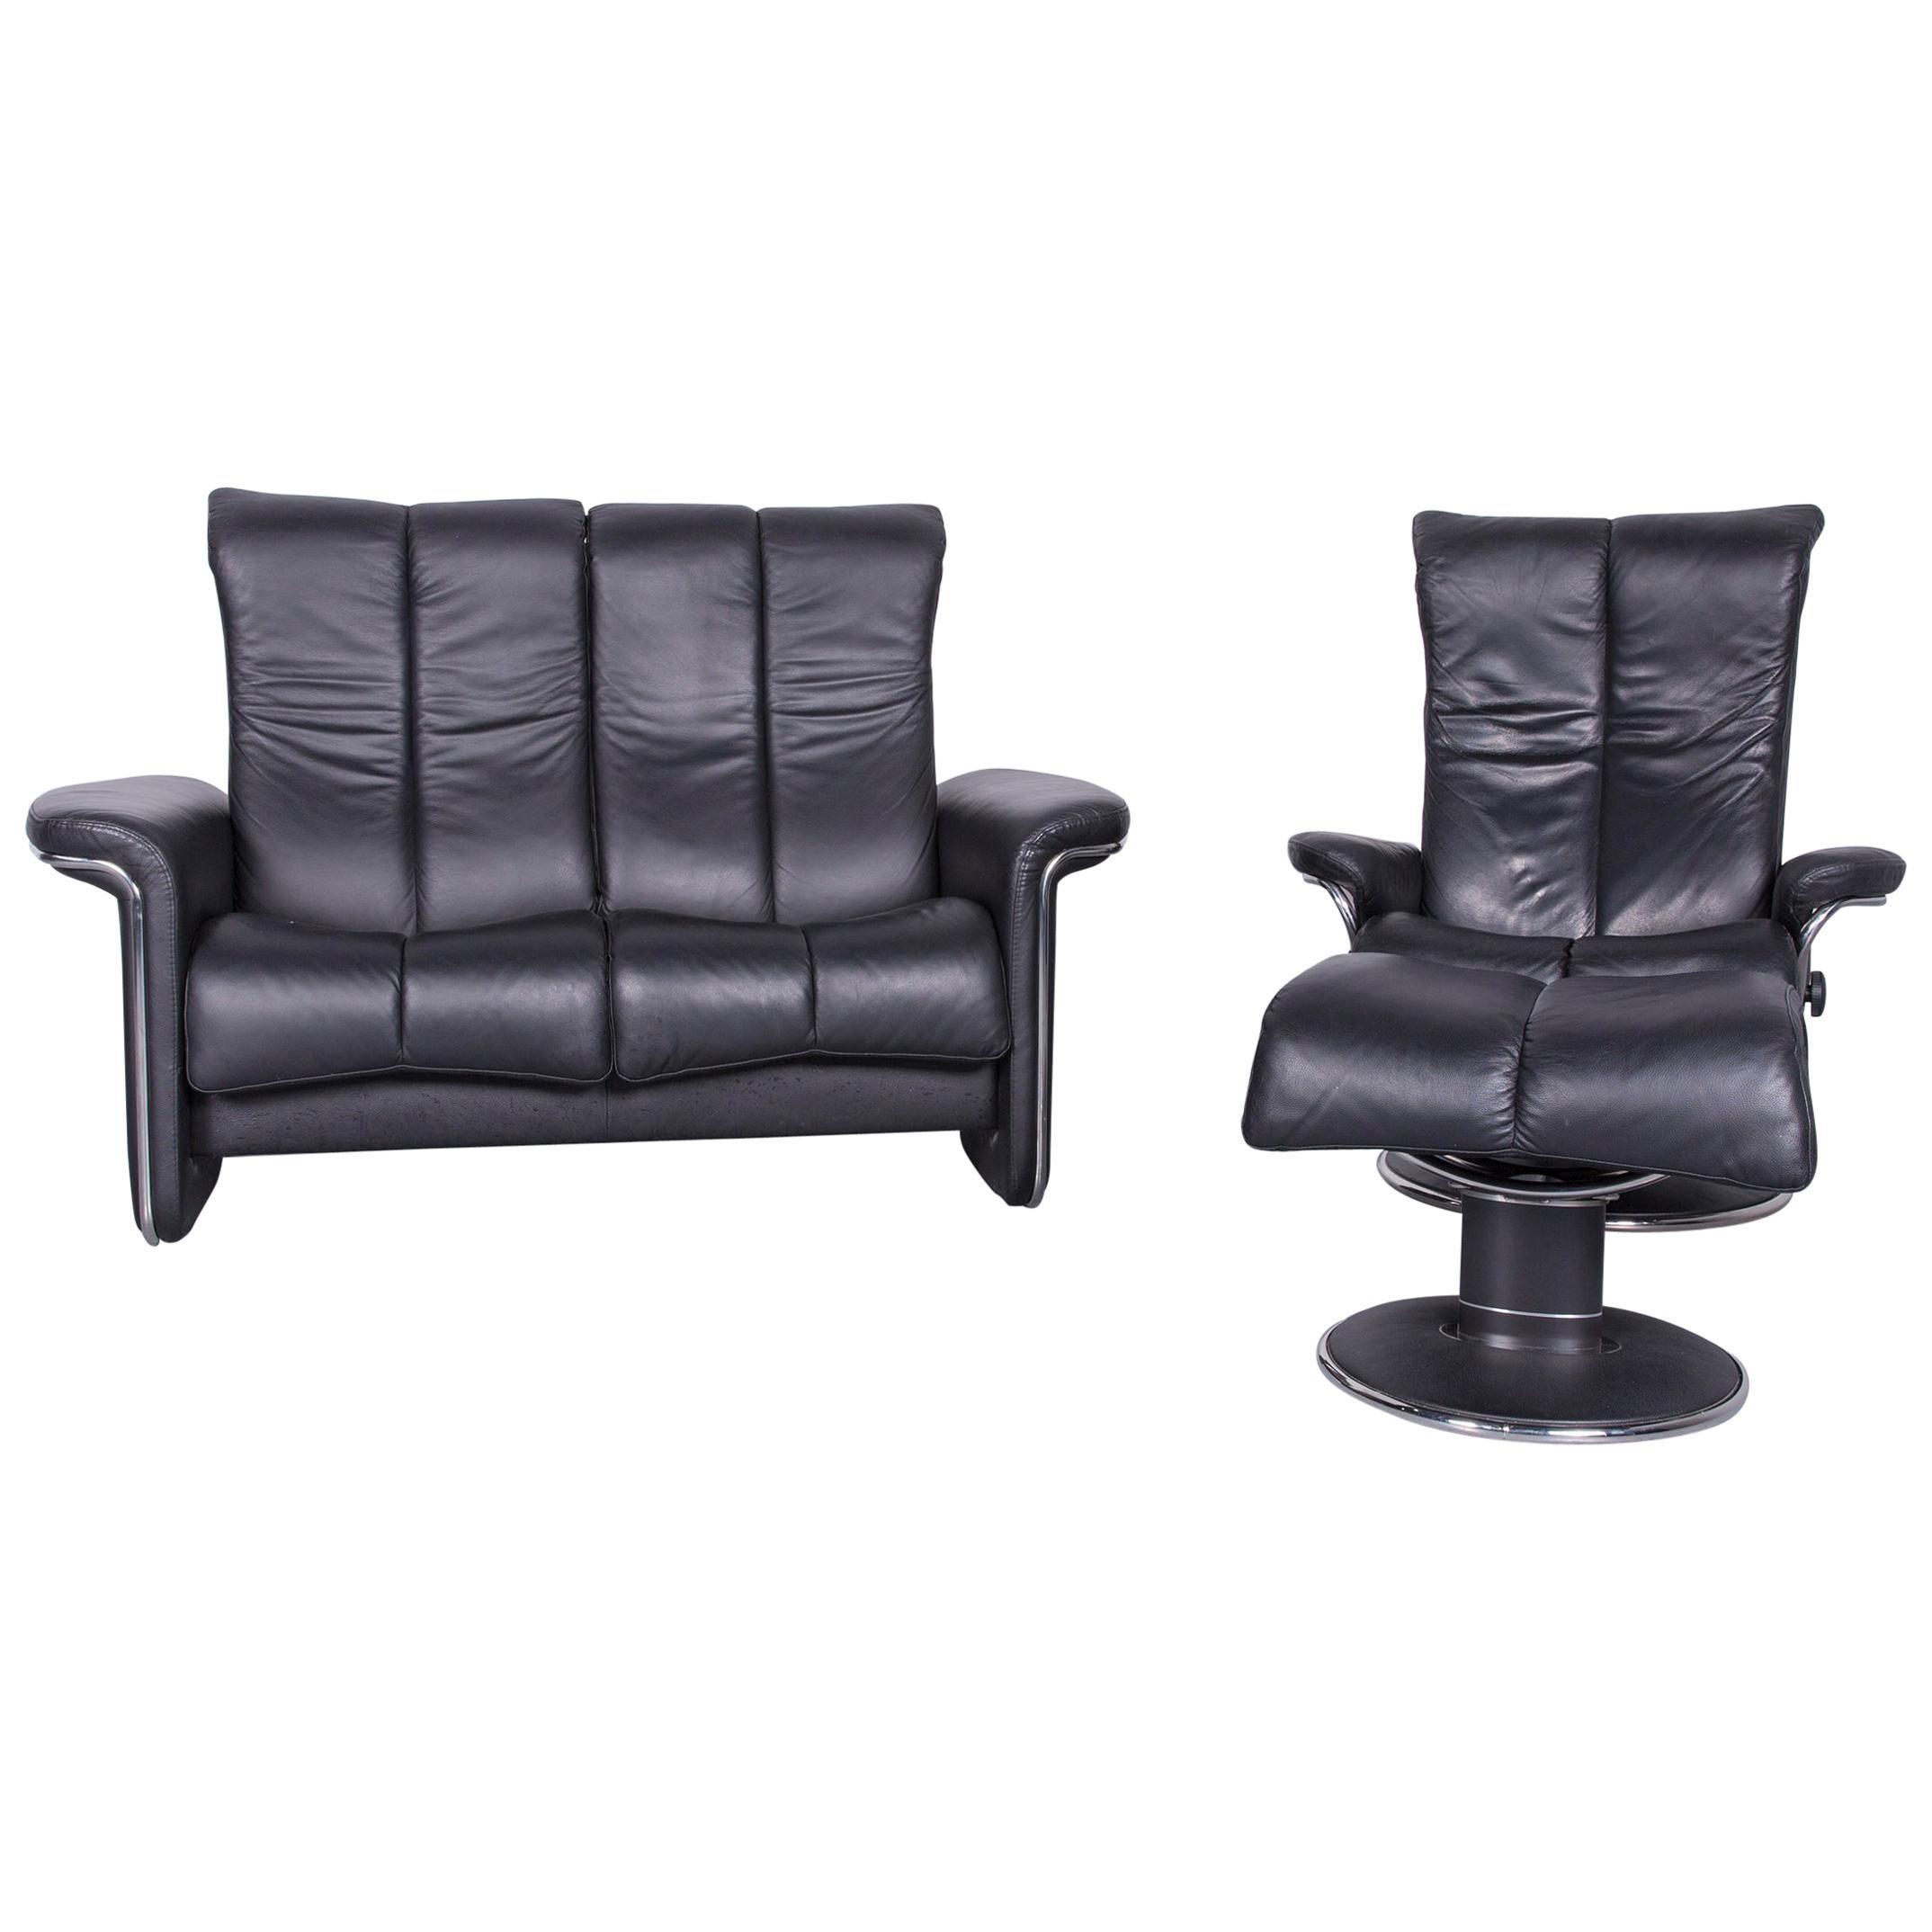 Ekornes Stressless Relax Sofa Armchair Set Black Leather TV Recliner Two-Seat